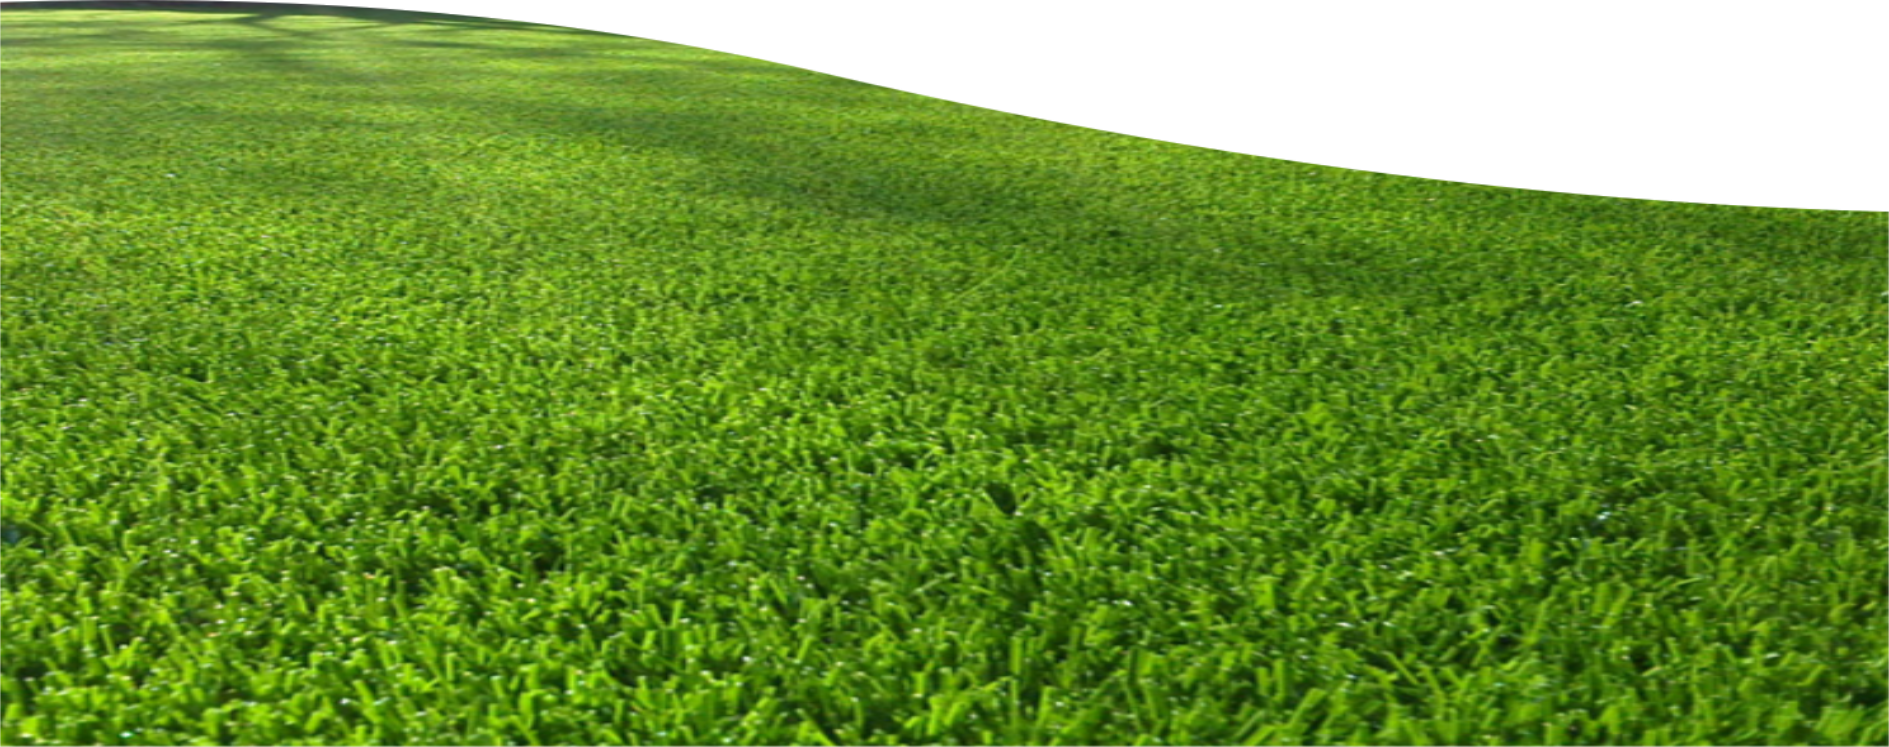 Field Grass Landscape PNG Image High Quality PNG Image